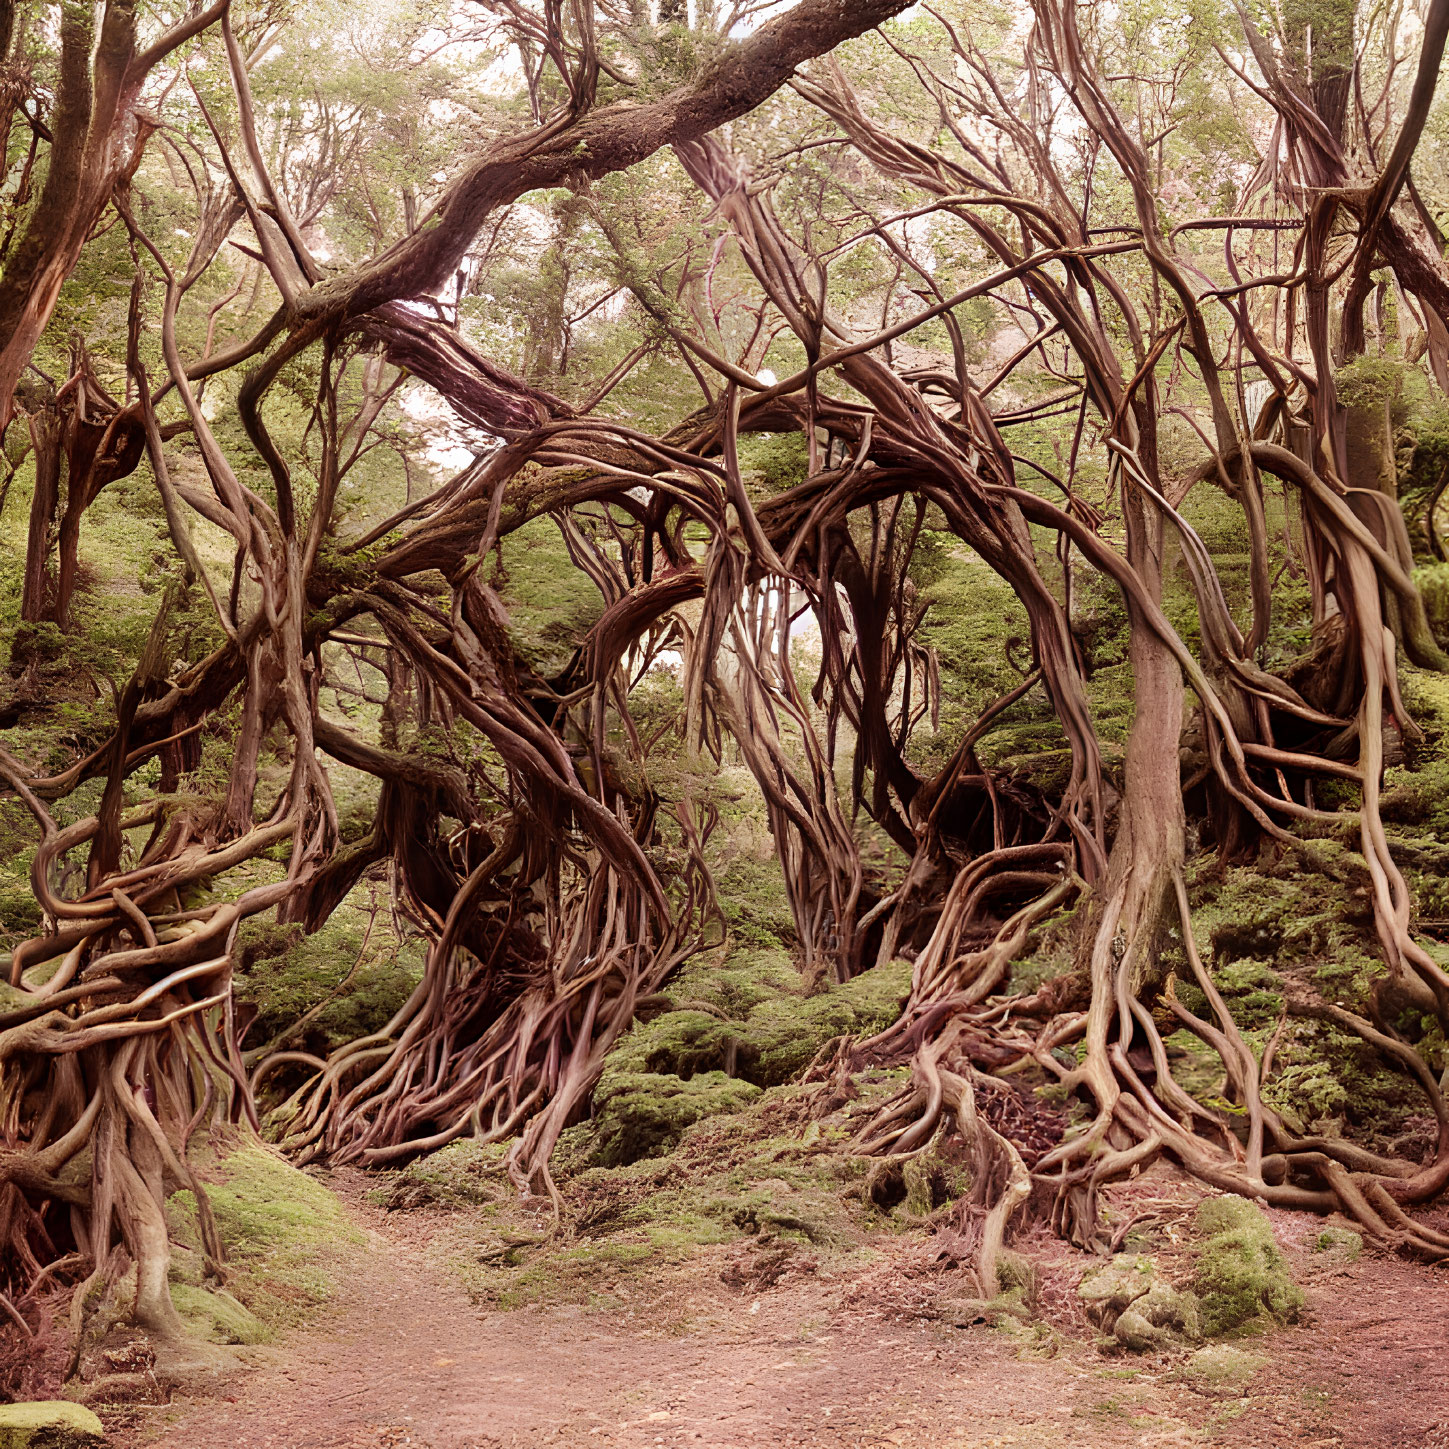 Twisted ancient trees in dense, mossy forest